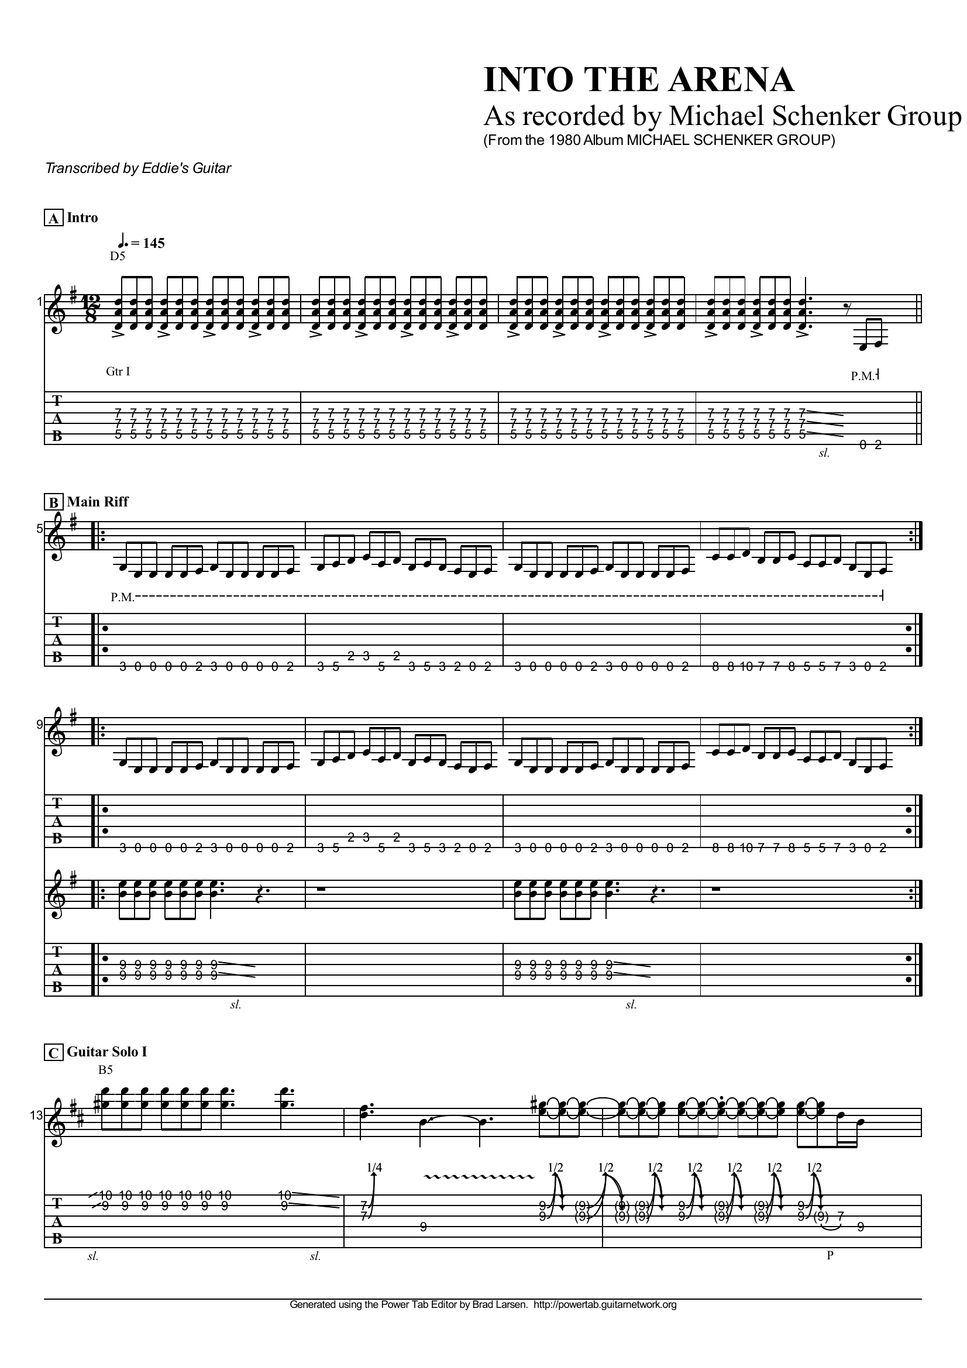 Michael Schenker Group - Into The Arena Sheet